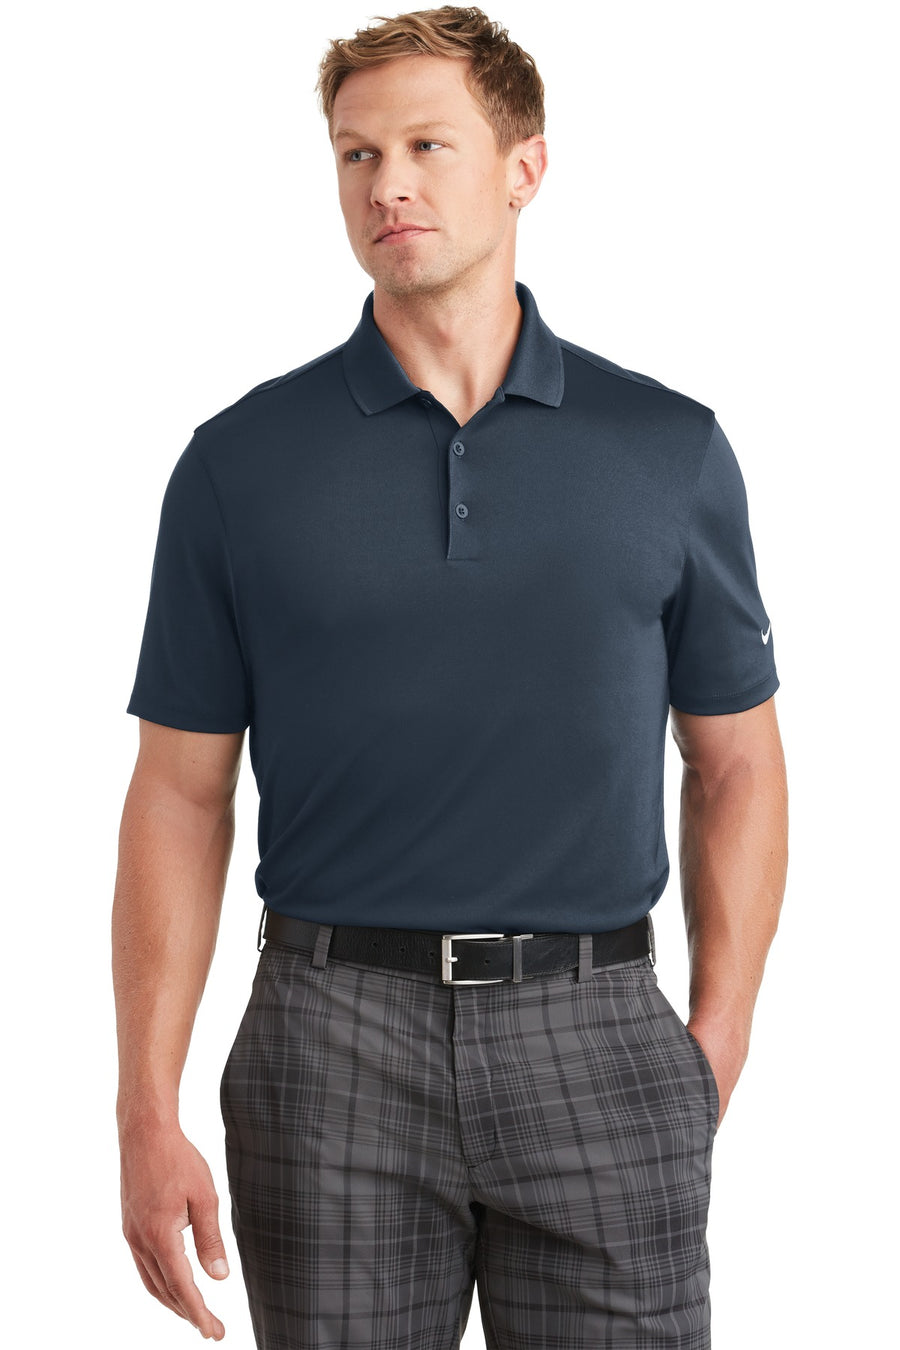 Nike Dri-FIT Classic Fit Players Polo with Flat Knit Collar.